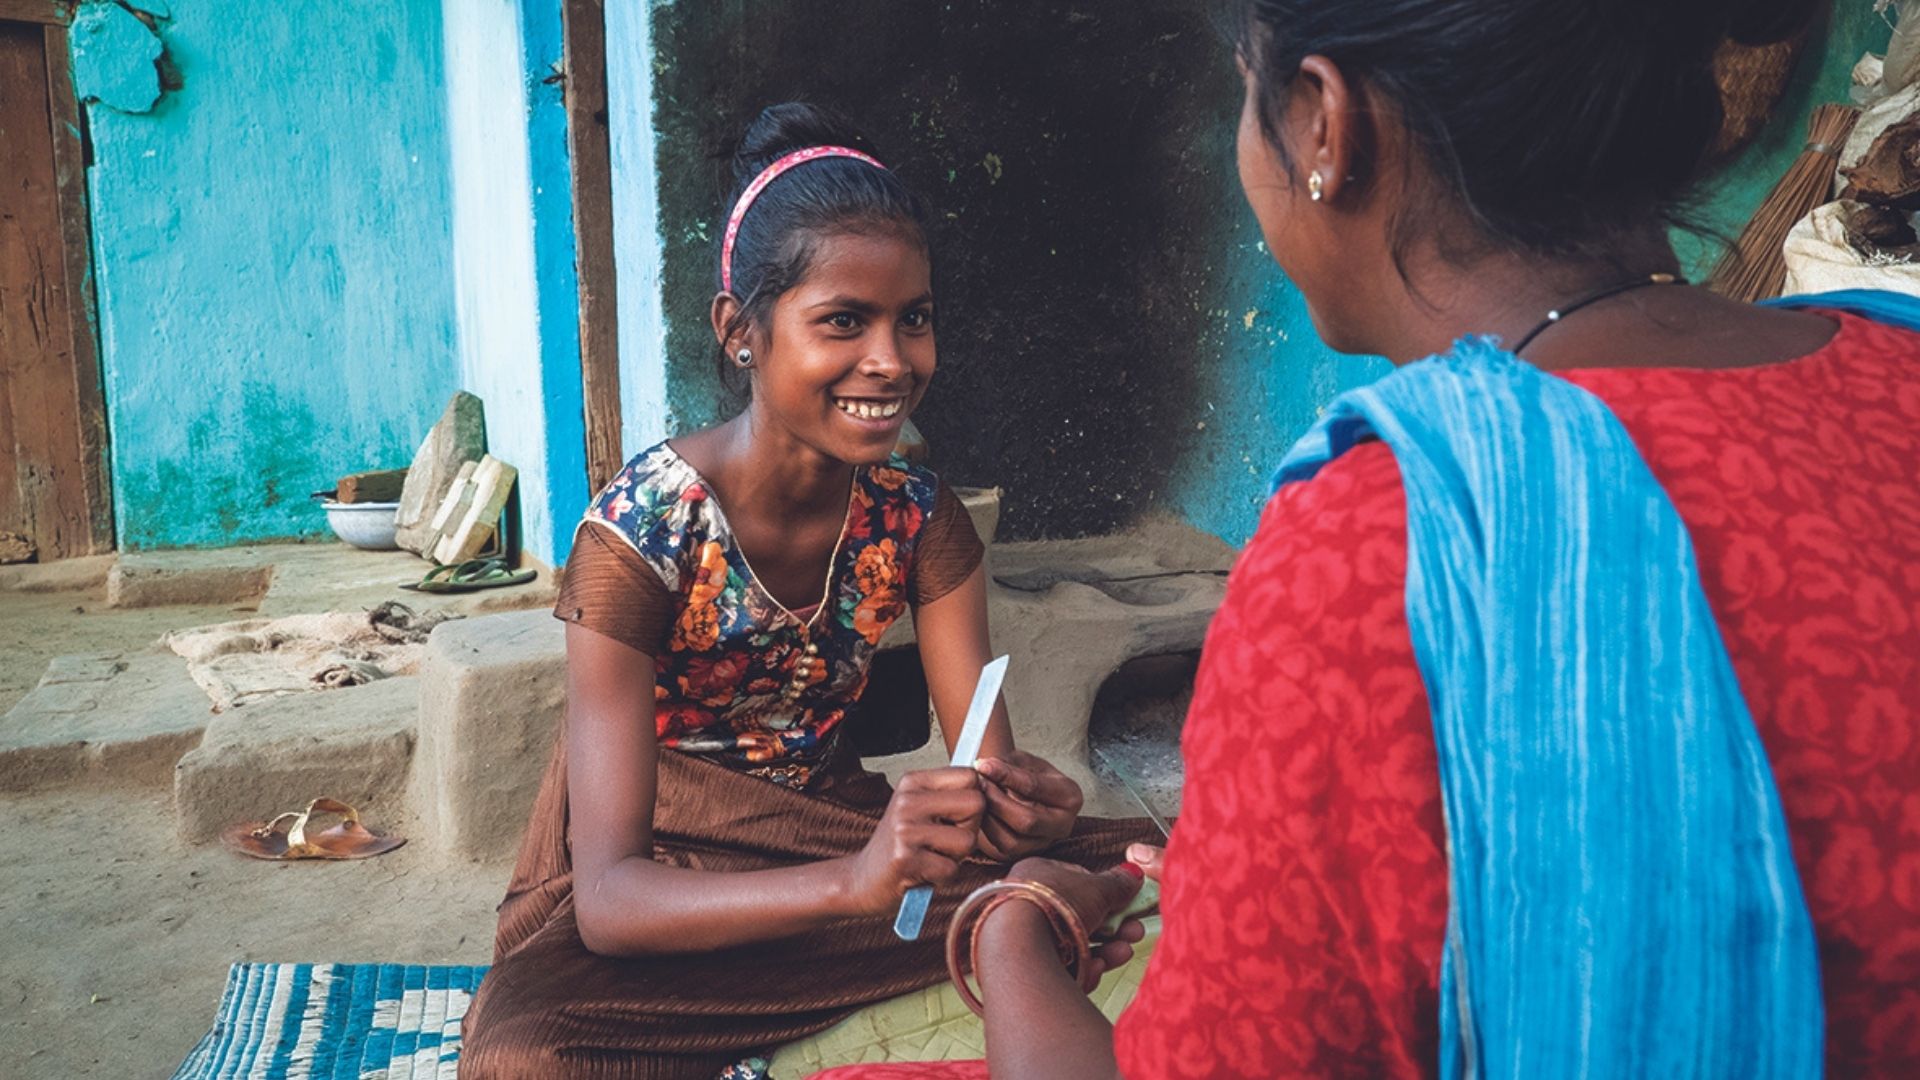 Jacinta, a young girl in India who has benefitted from the support of our local partners, CINI